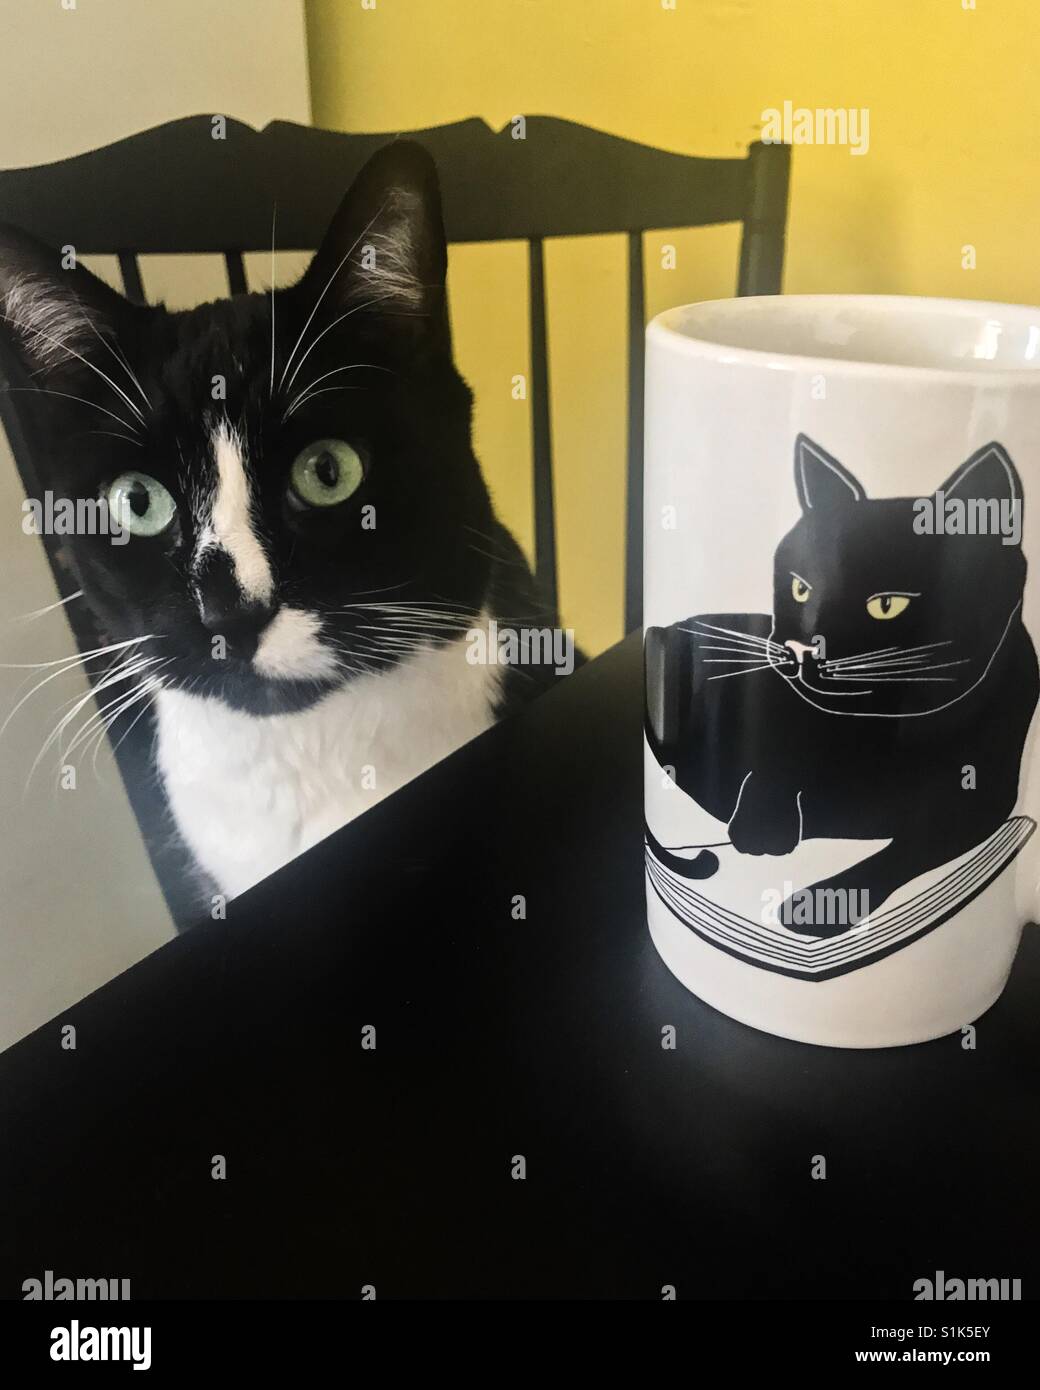 https://c8.alamy.com/comp/S1K5EY/cat-and-cup-that-look-alike-S1K5EY.jpg